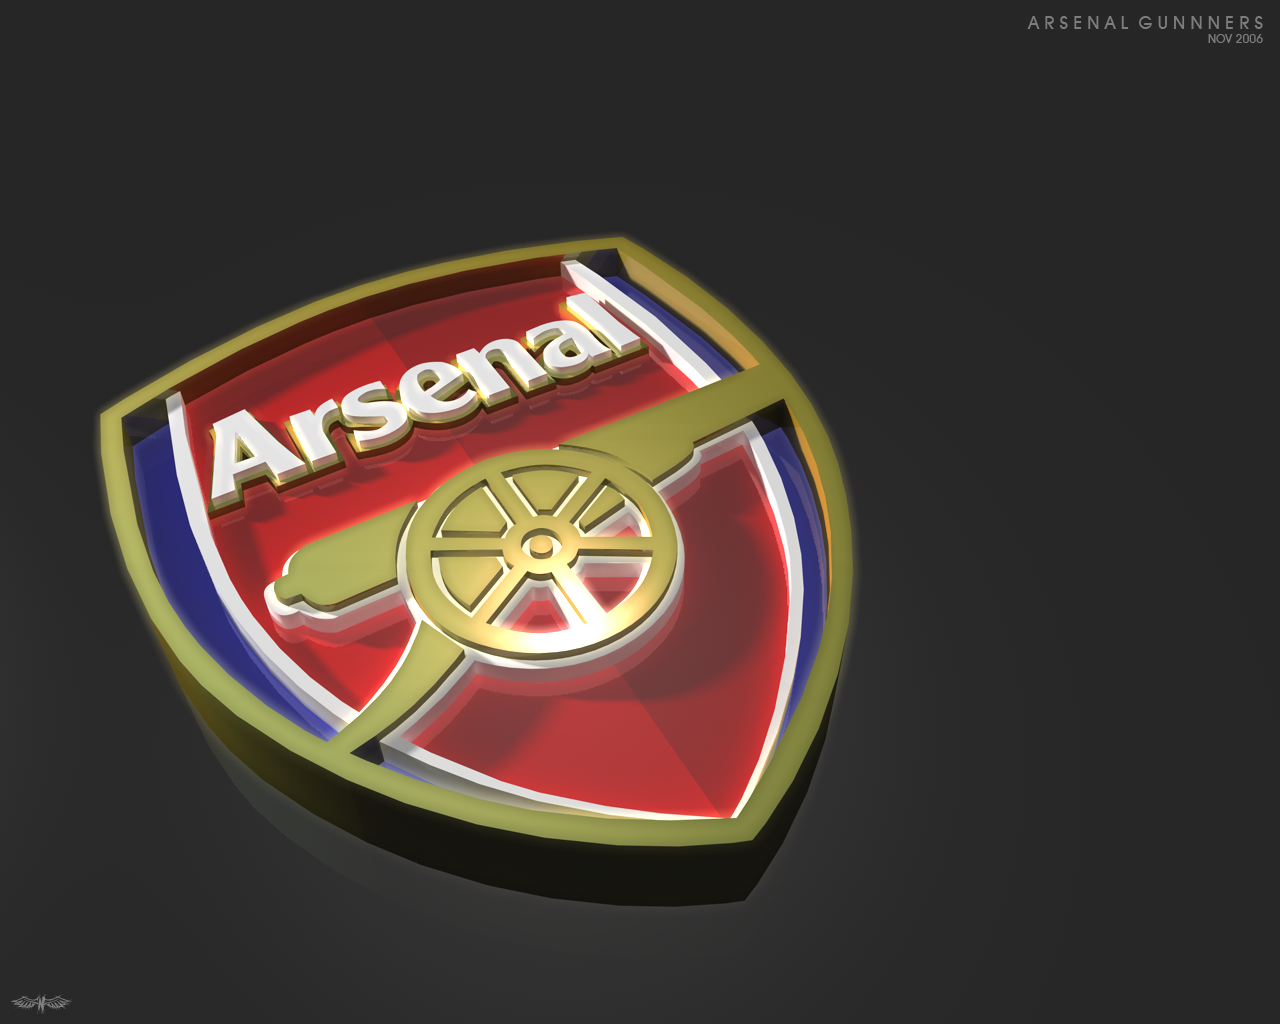 Arsenal Football Club Wallpapers HD HD Wallpapers Backgrounds